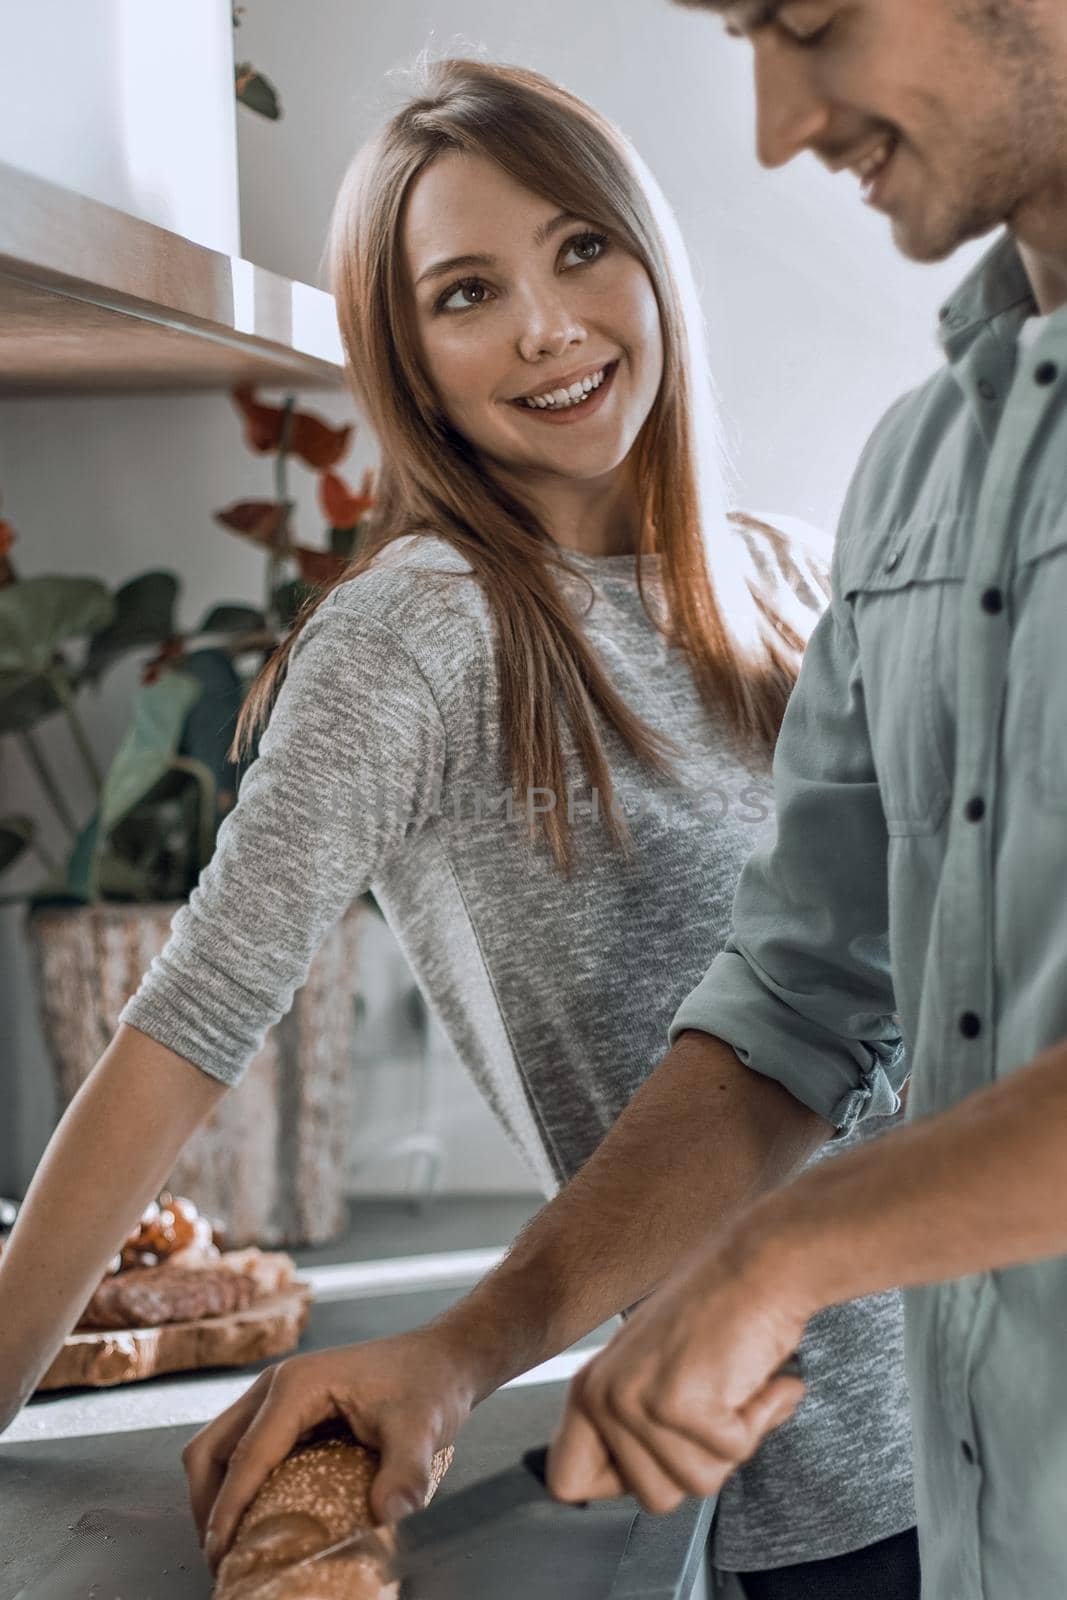 modern young couple enjoys cooking Breakfast together.